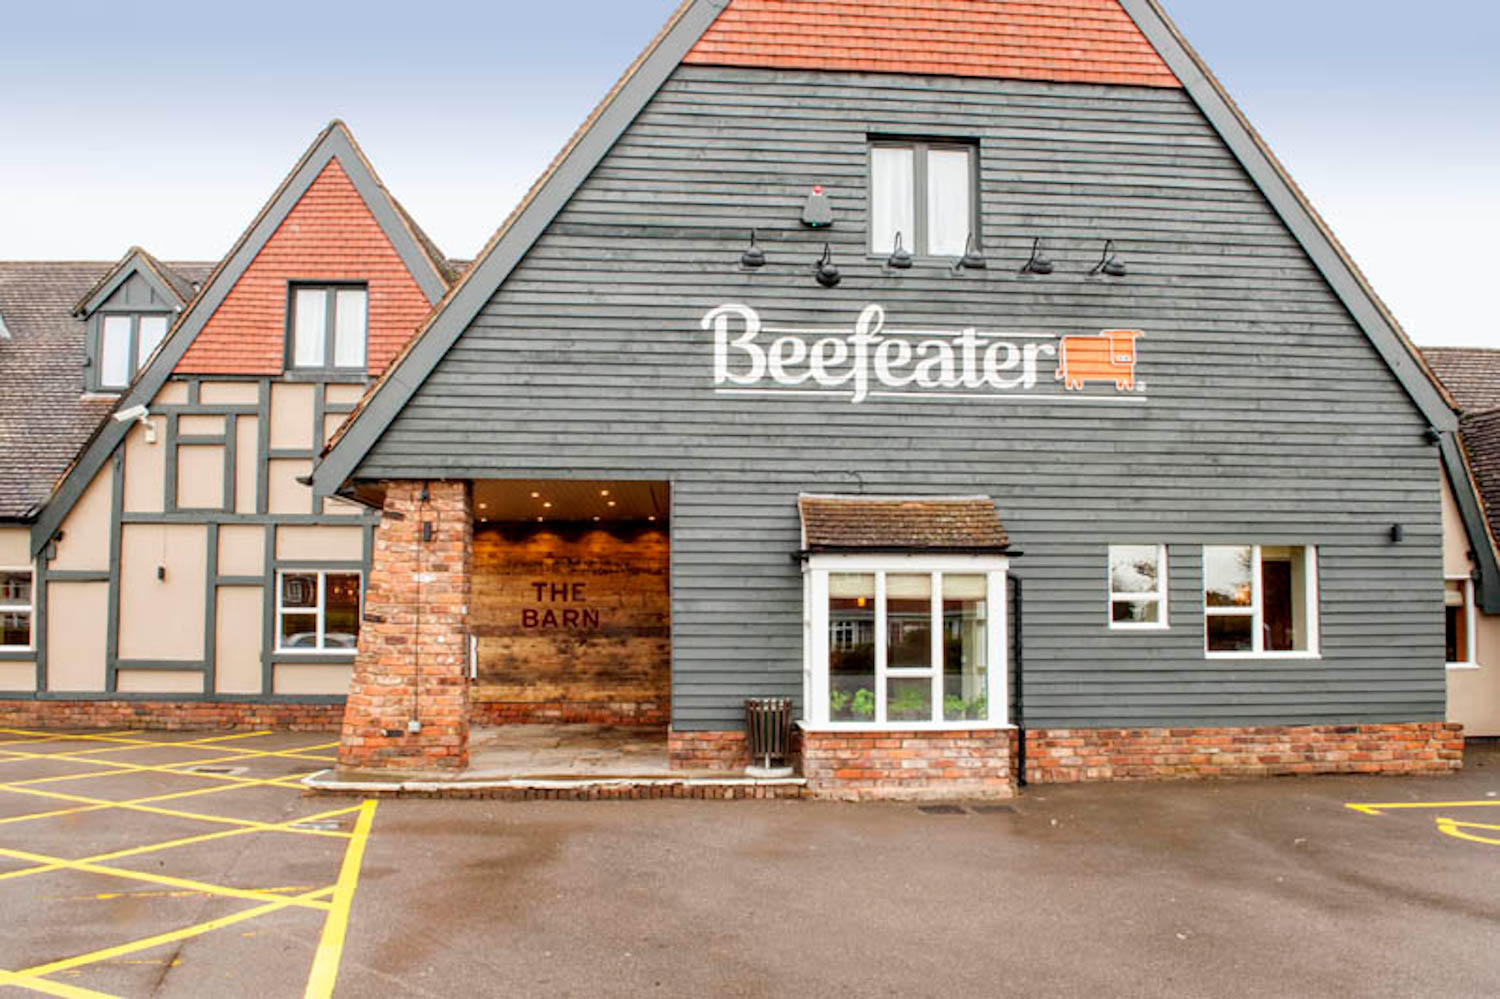 Beefeater restaurant exterior Solihull (Hockley Heath, M42) hotel Solihull 03333 218869